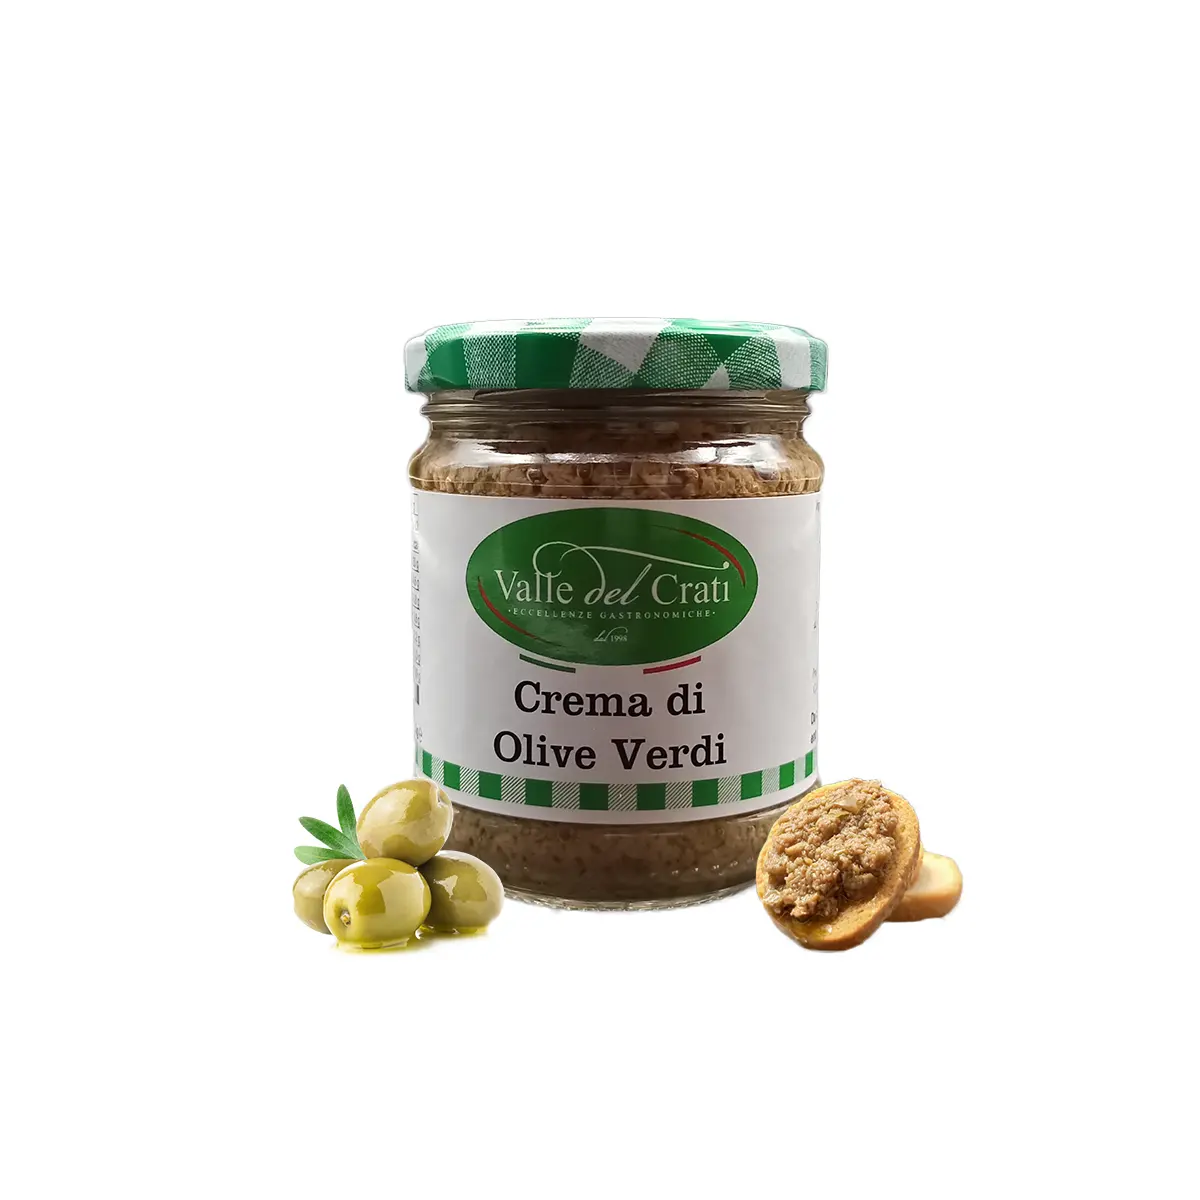 Green Olive Cream | Italian spread cream with green olives and spices in olive oil | 180 gr